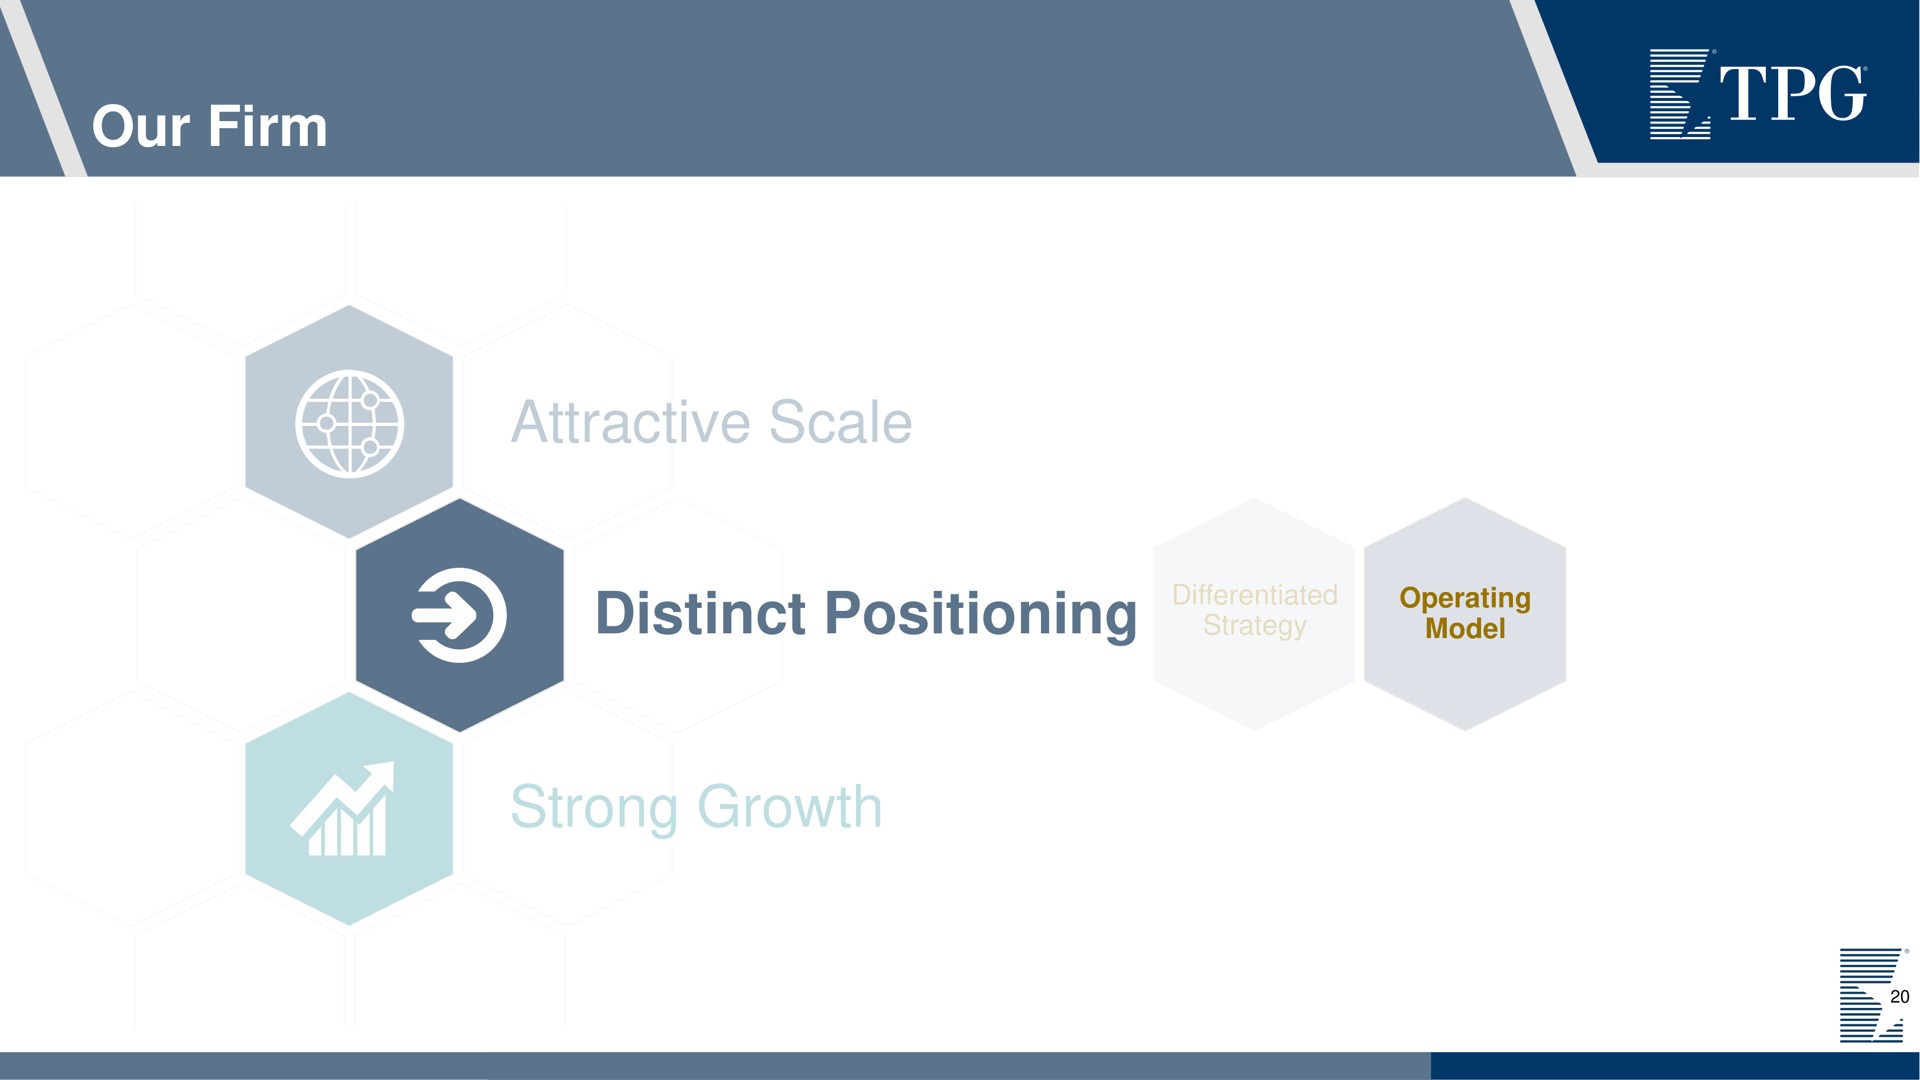 our firm attractive scale distinct positioning strong growth model | TPG